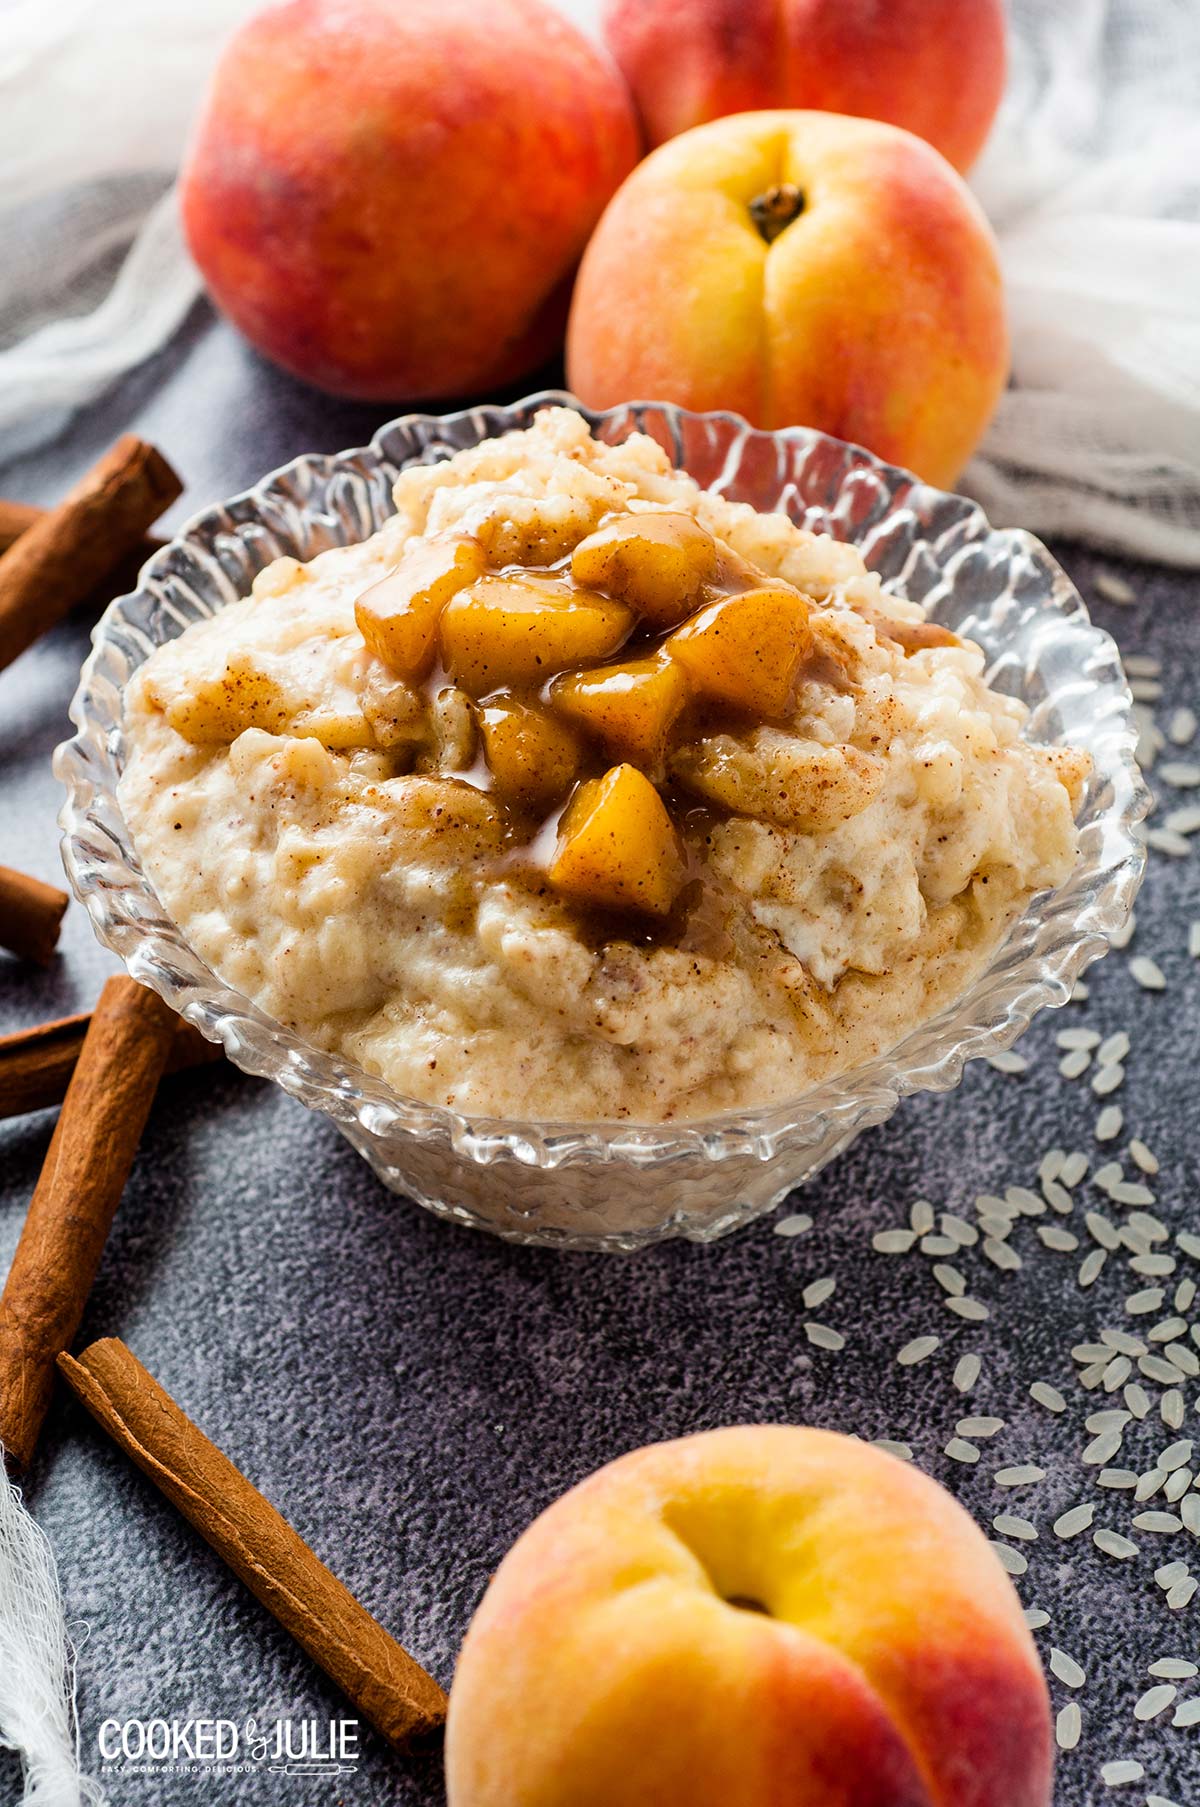 rice pudding and peaches in a glass bowl with peaches on the side 